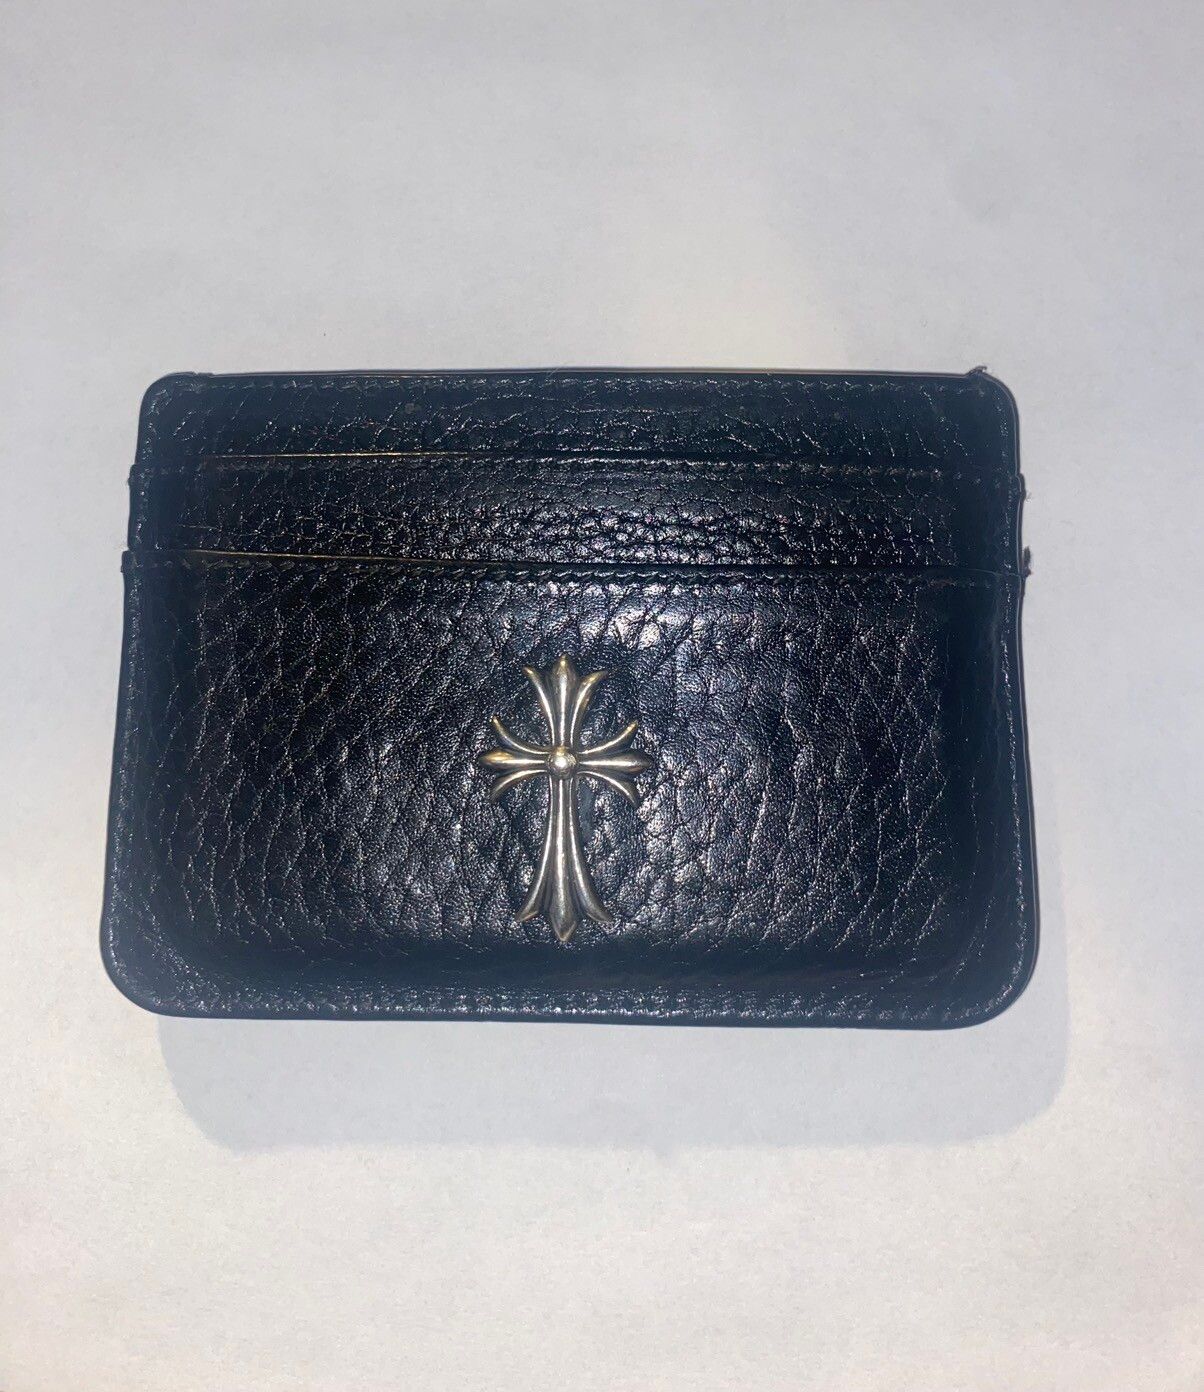 Pre-owned Chrome Hearts Cross Card Holder In Black